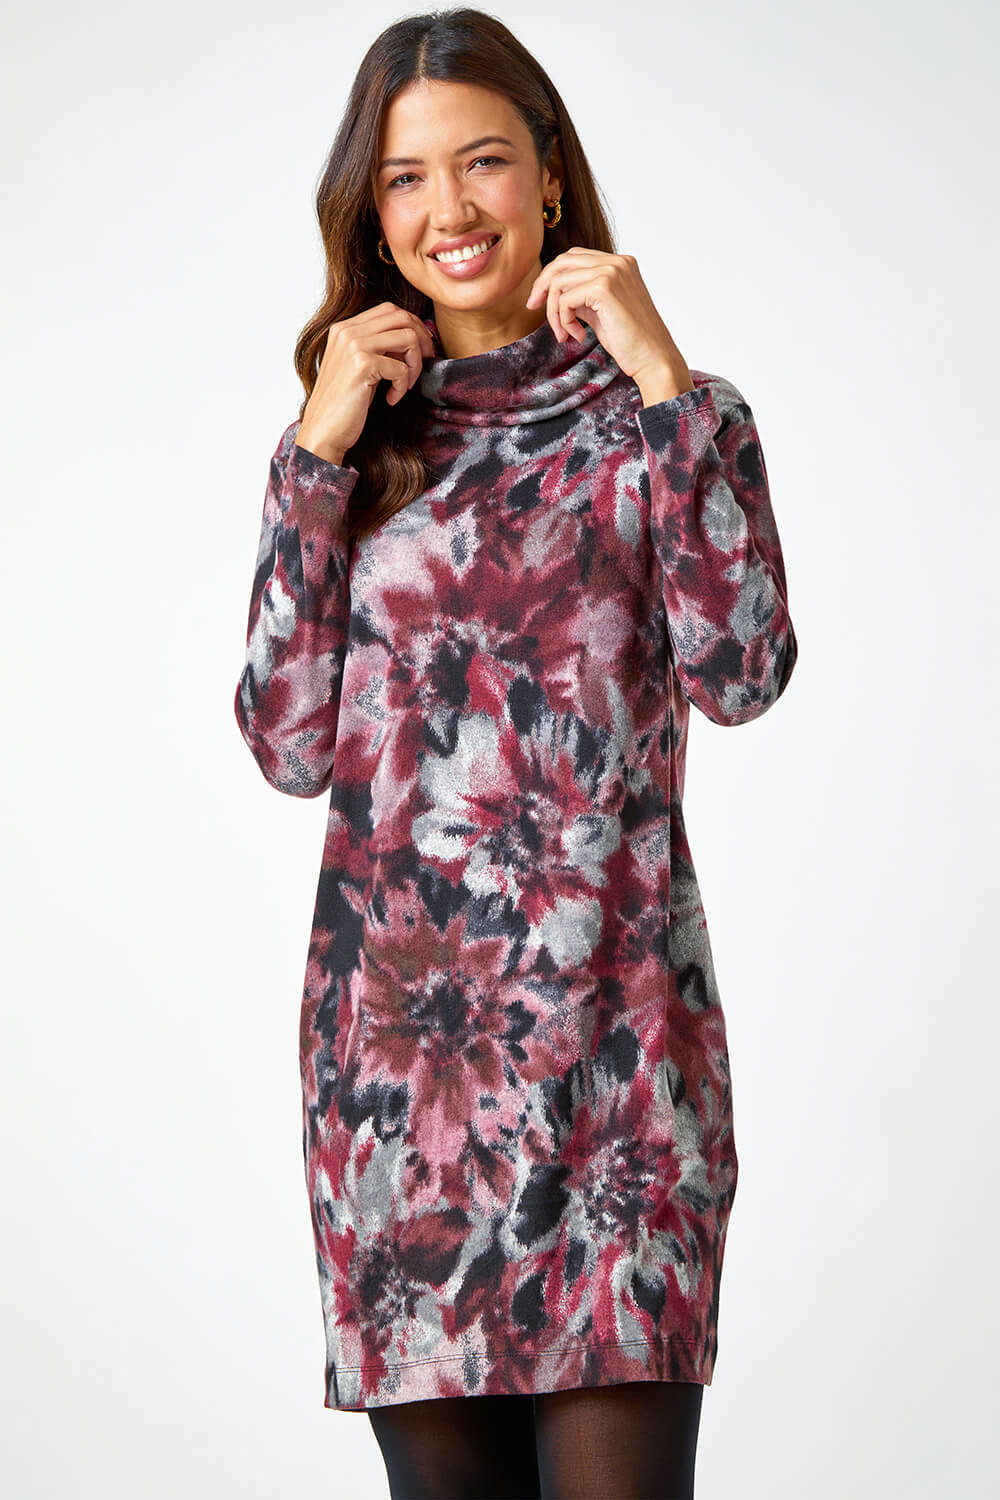 Red Floral Tie Dye Print Tunic Stretch Dress, Image 2 of 5